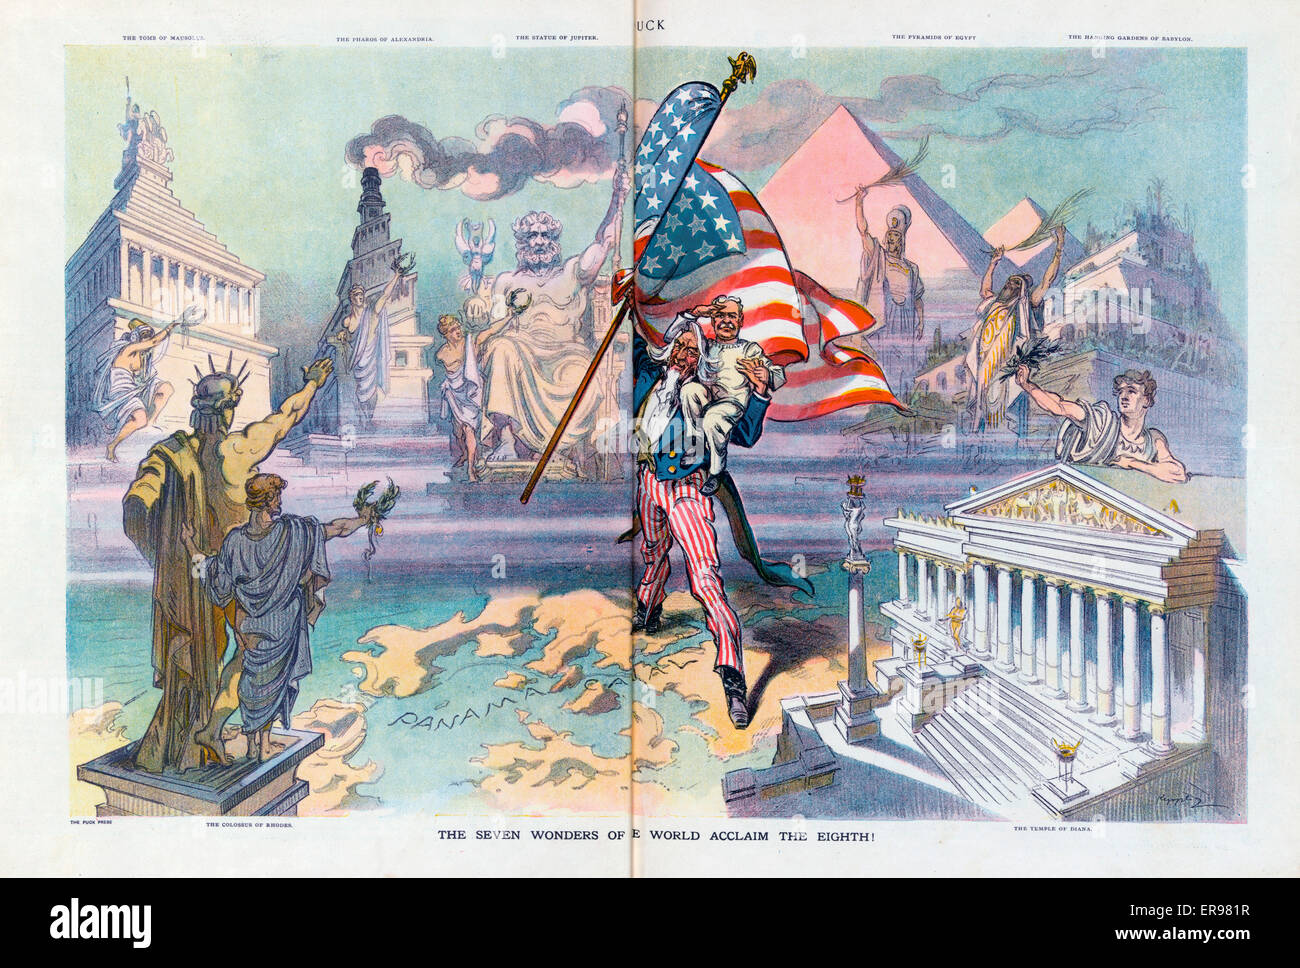 The seven wonders of the world acclaim the eighth!. Illustration shows Uncle Sam holding the American flag raised in his right hand and with George W. Goethals sitting on his left shoulder, standing astride the Panama Canal, which he is presenting as the Stock Photo